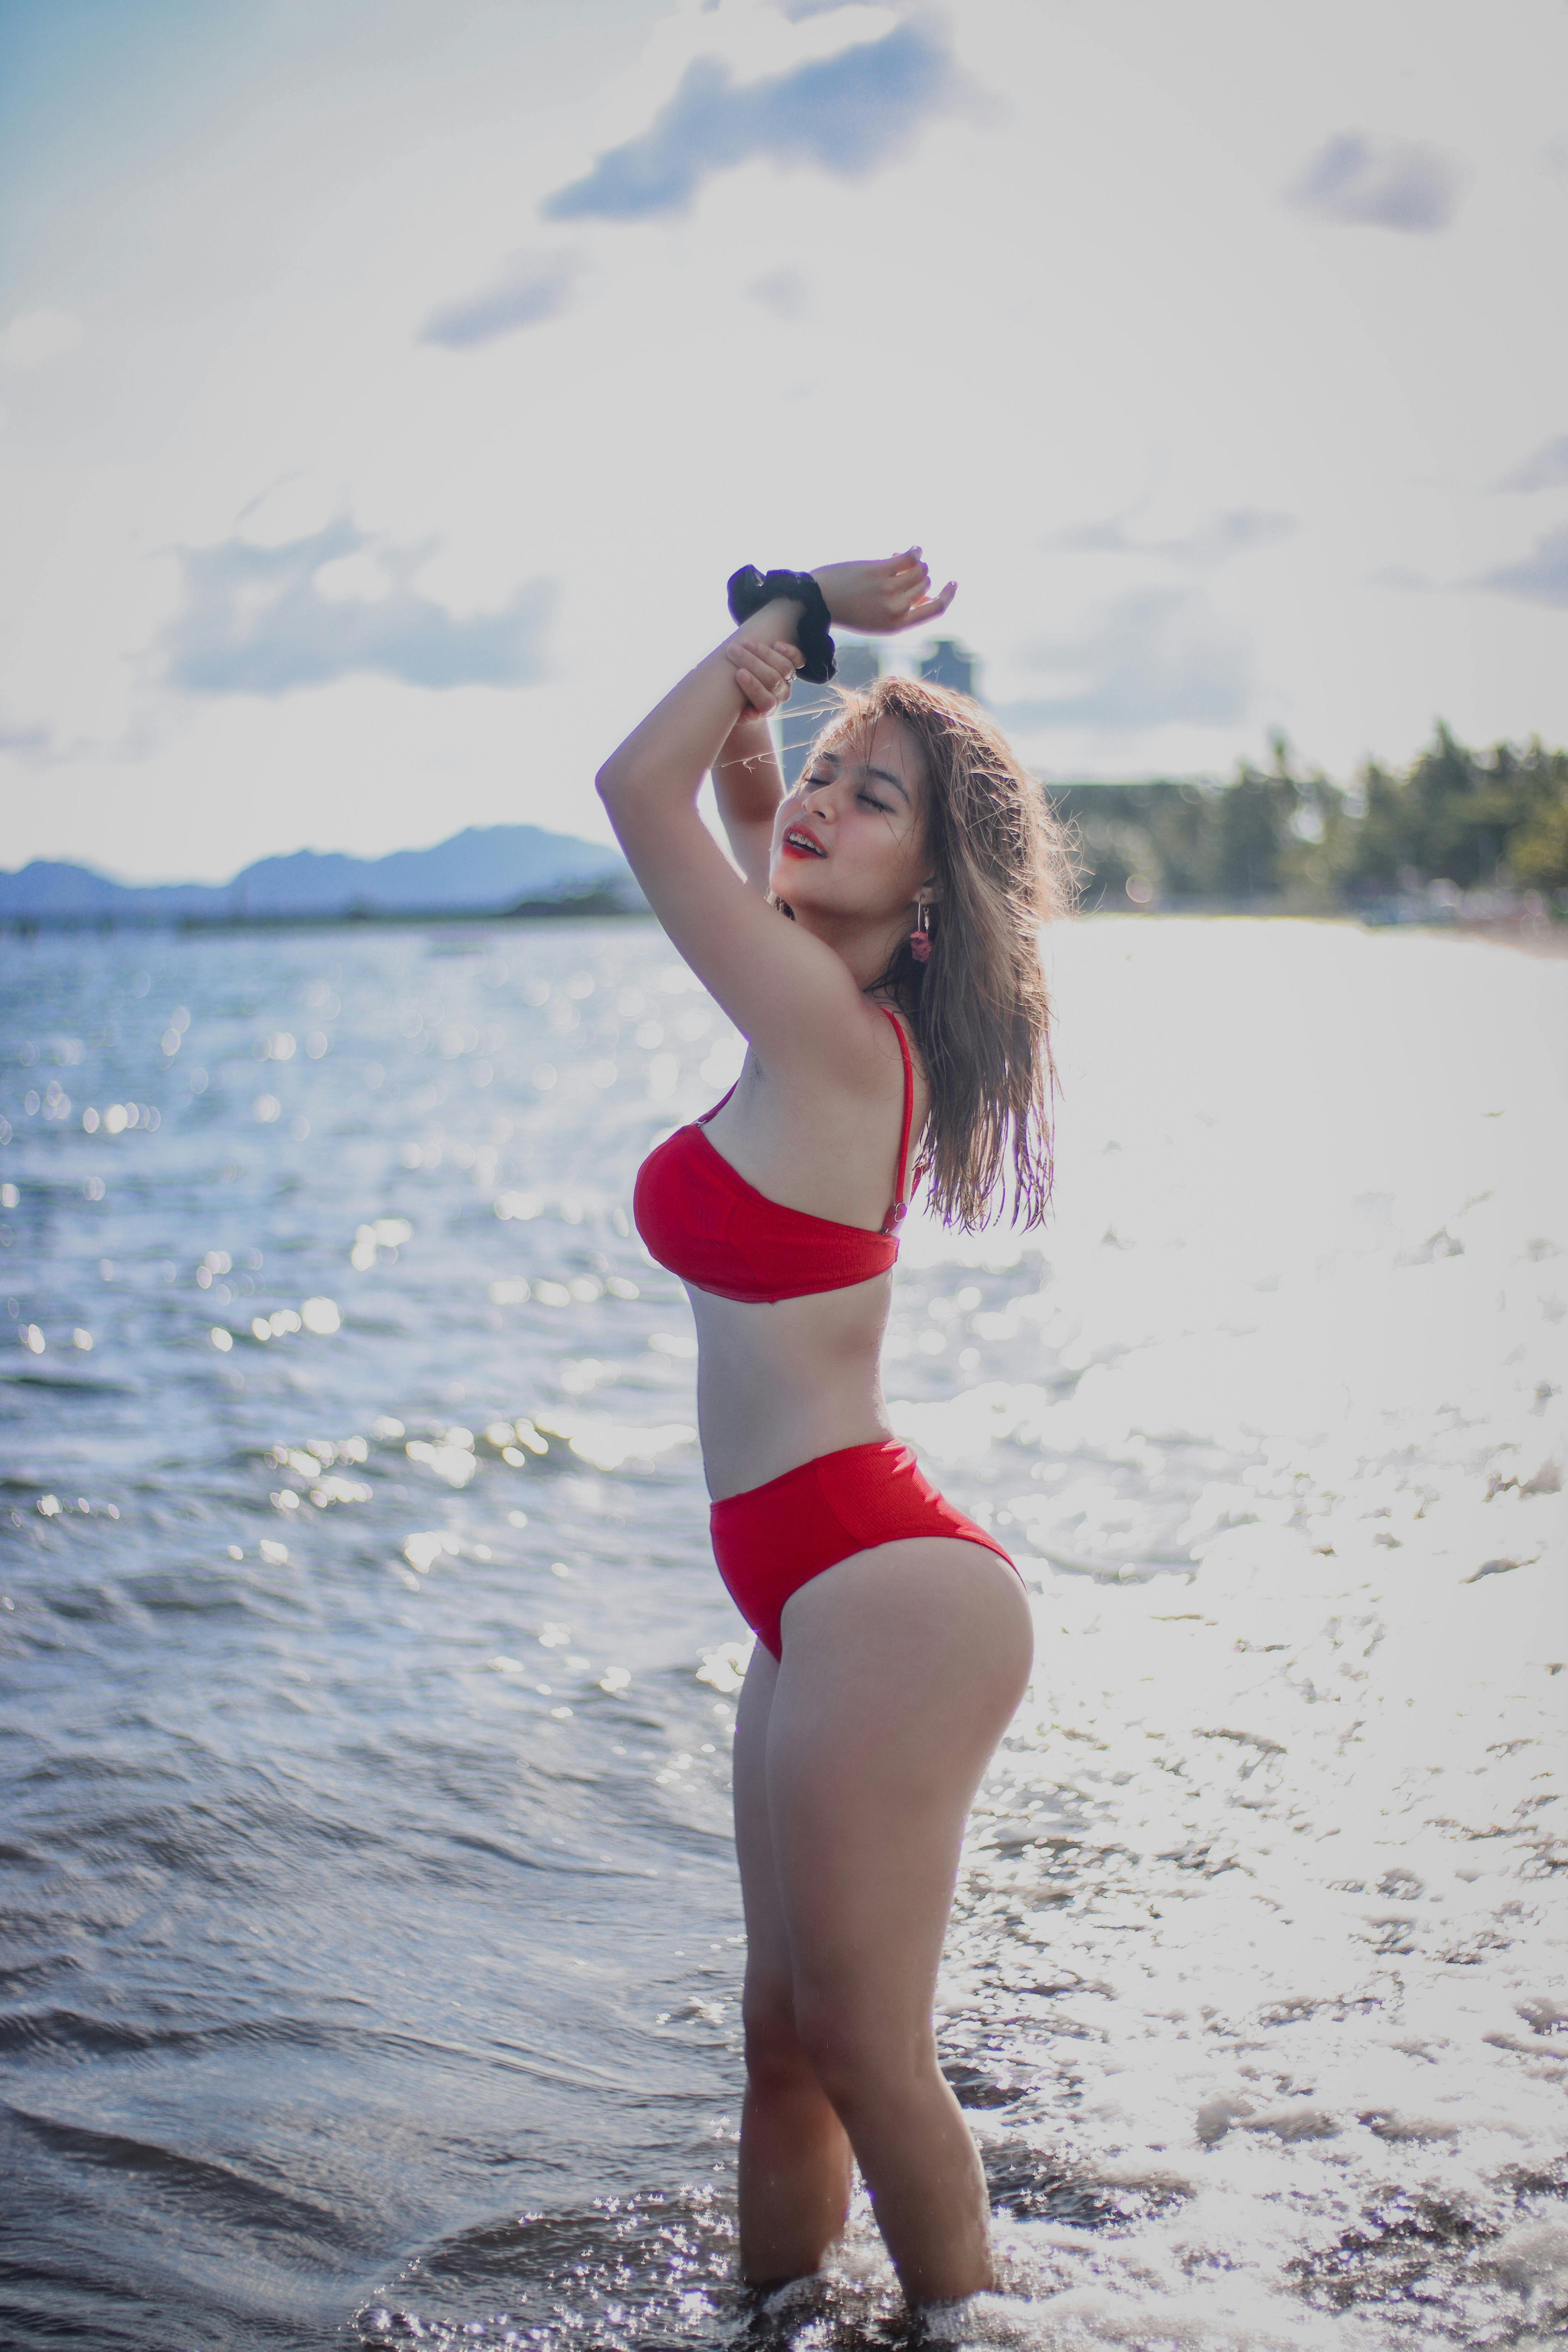 Swimsuit / Beach posing ideas | Gallery posted by Gabrielle Moses | Lemon8